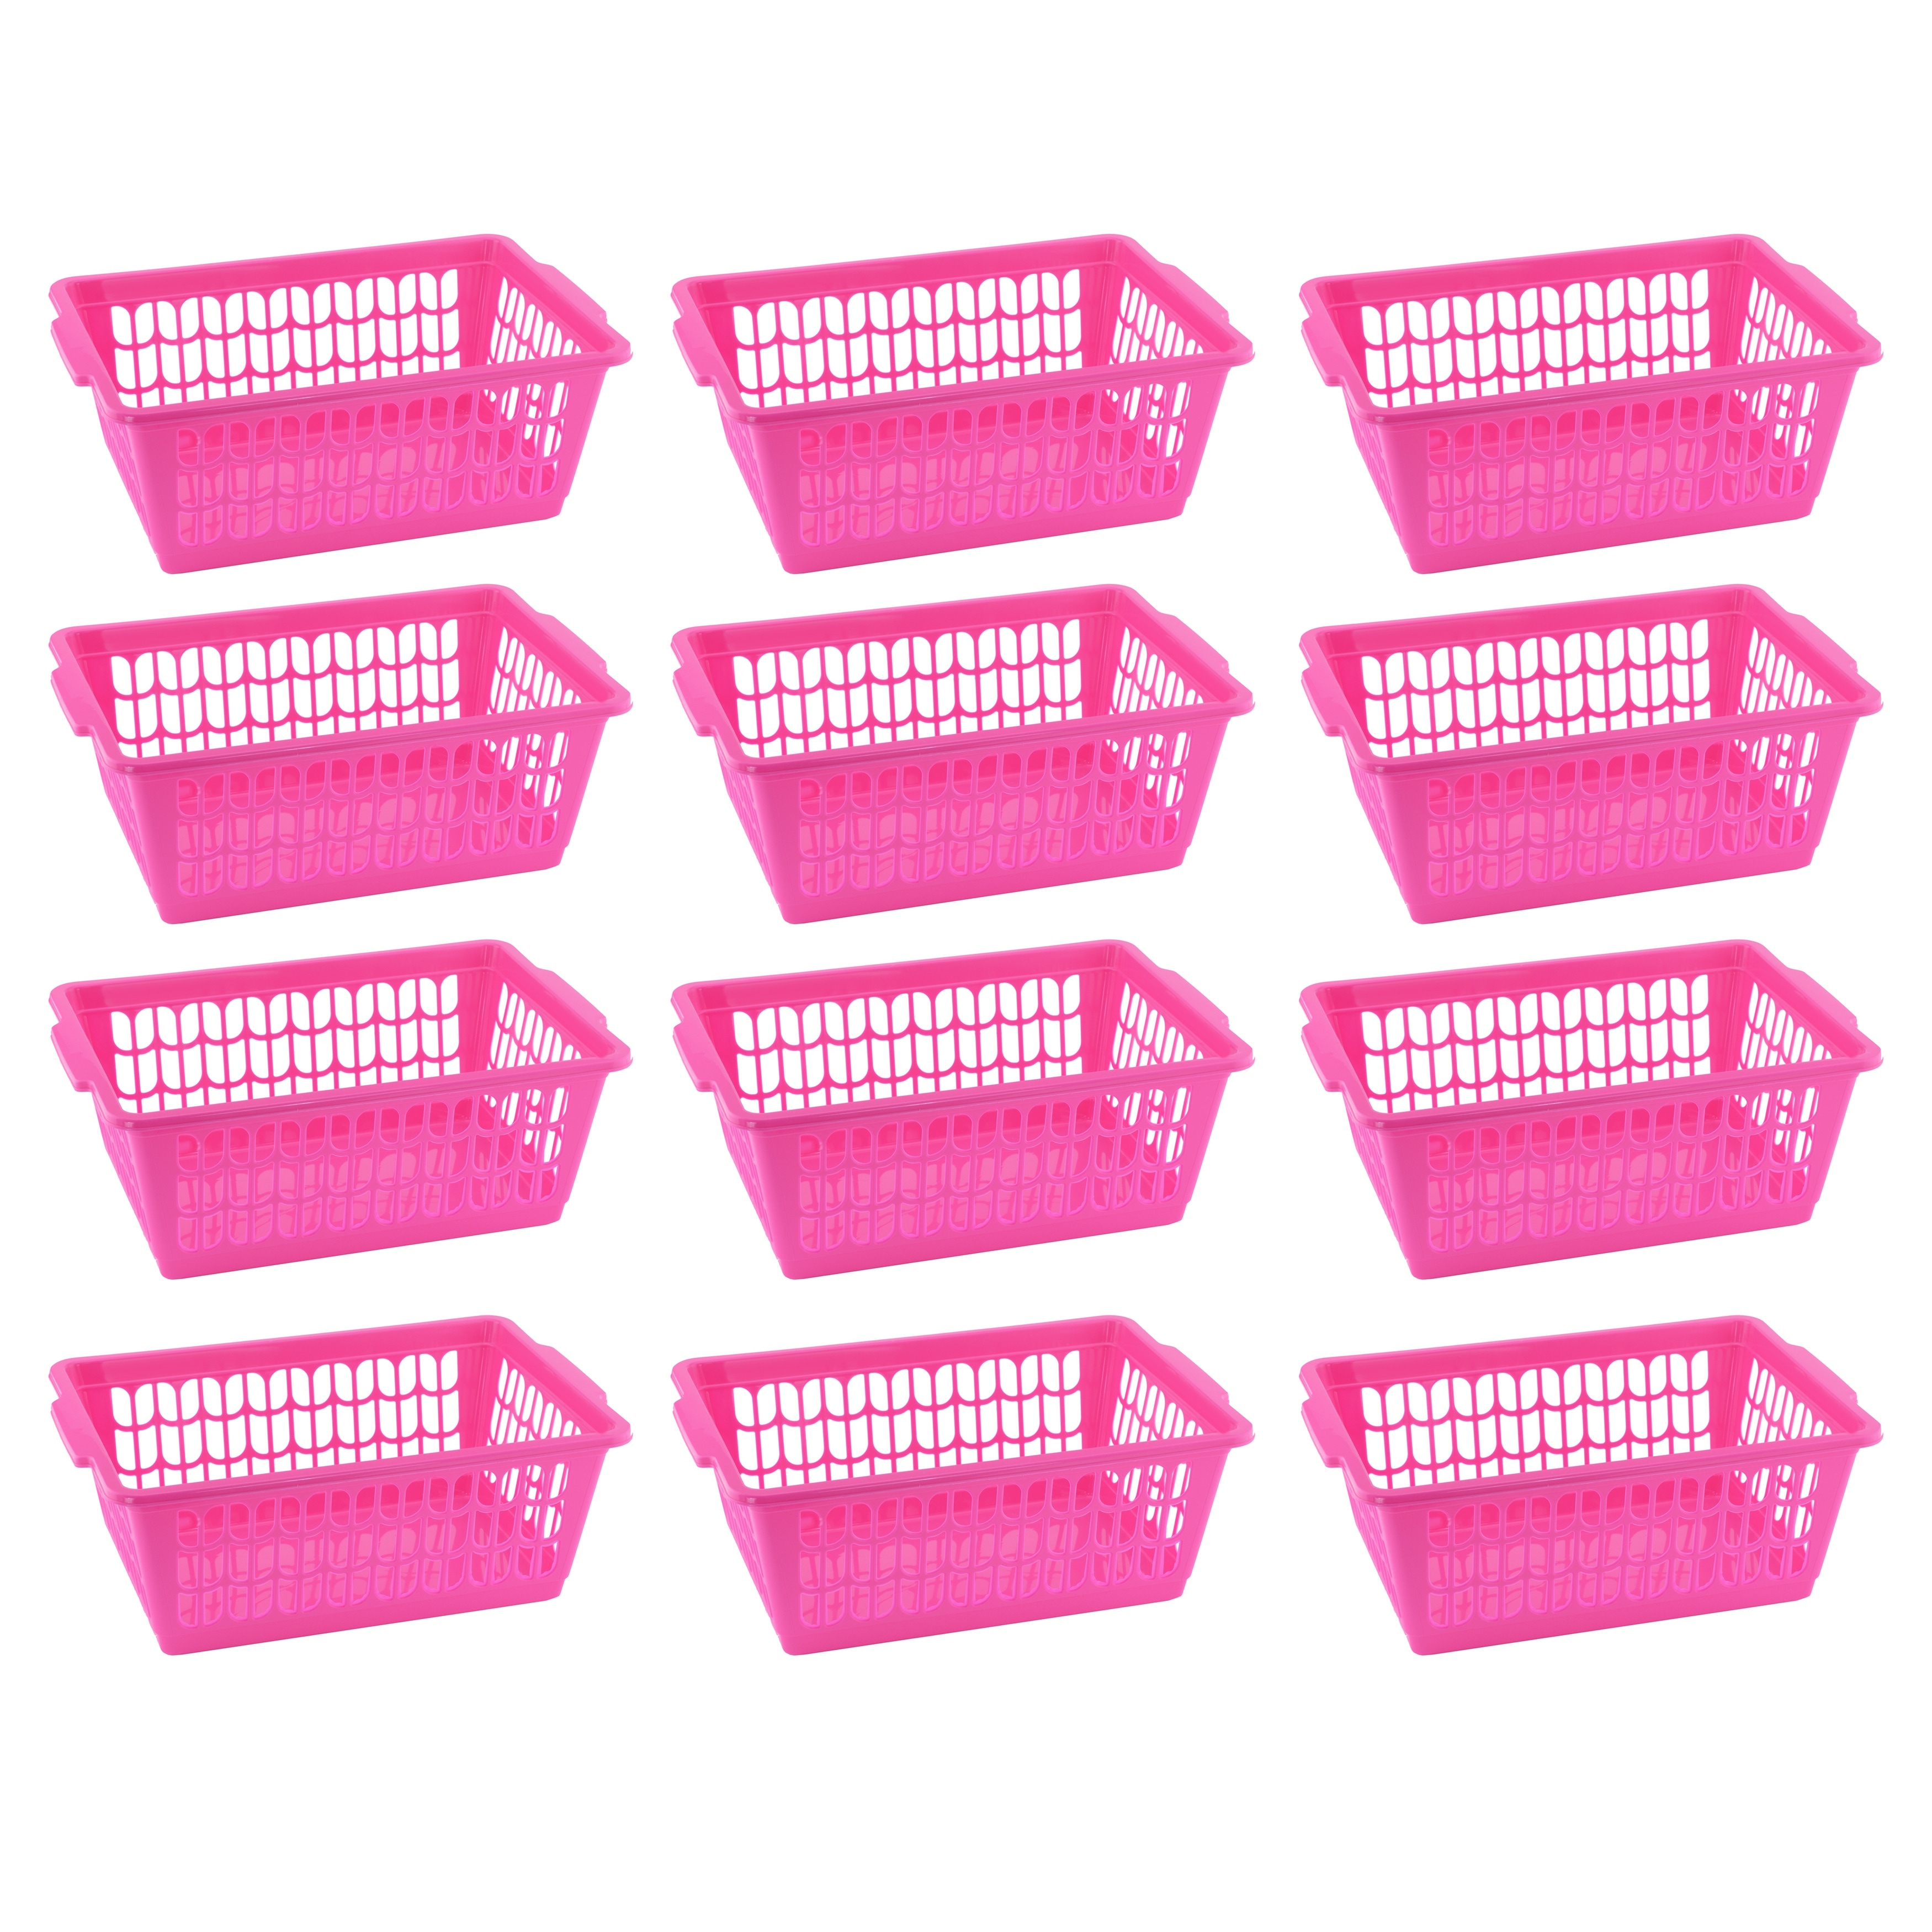 https://ak1.ostkcdn.com/images/products/is/images/direct/63003c6798f128dbb843be5e91de153b31e87e29/Small-Plastic-Storage-Basket-for-Organizing-Kitchen-Pantry%2C-Countertop.jpg